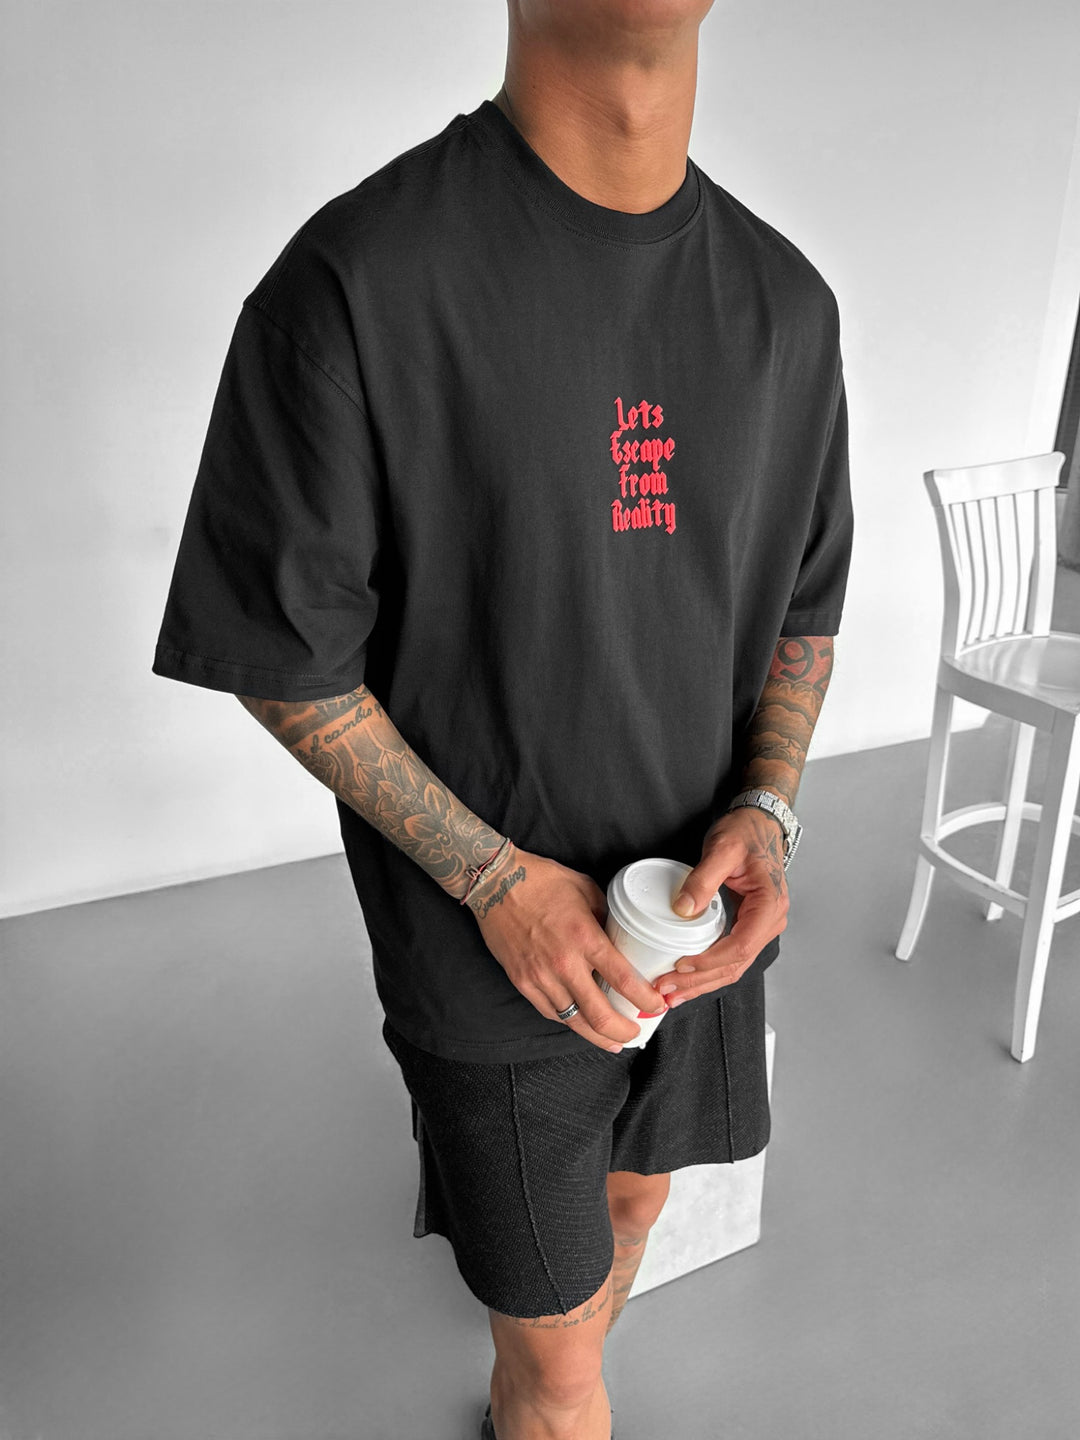 Oversize Let's Escape T-shirt - Black and Red